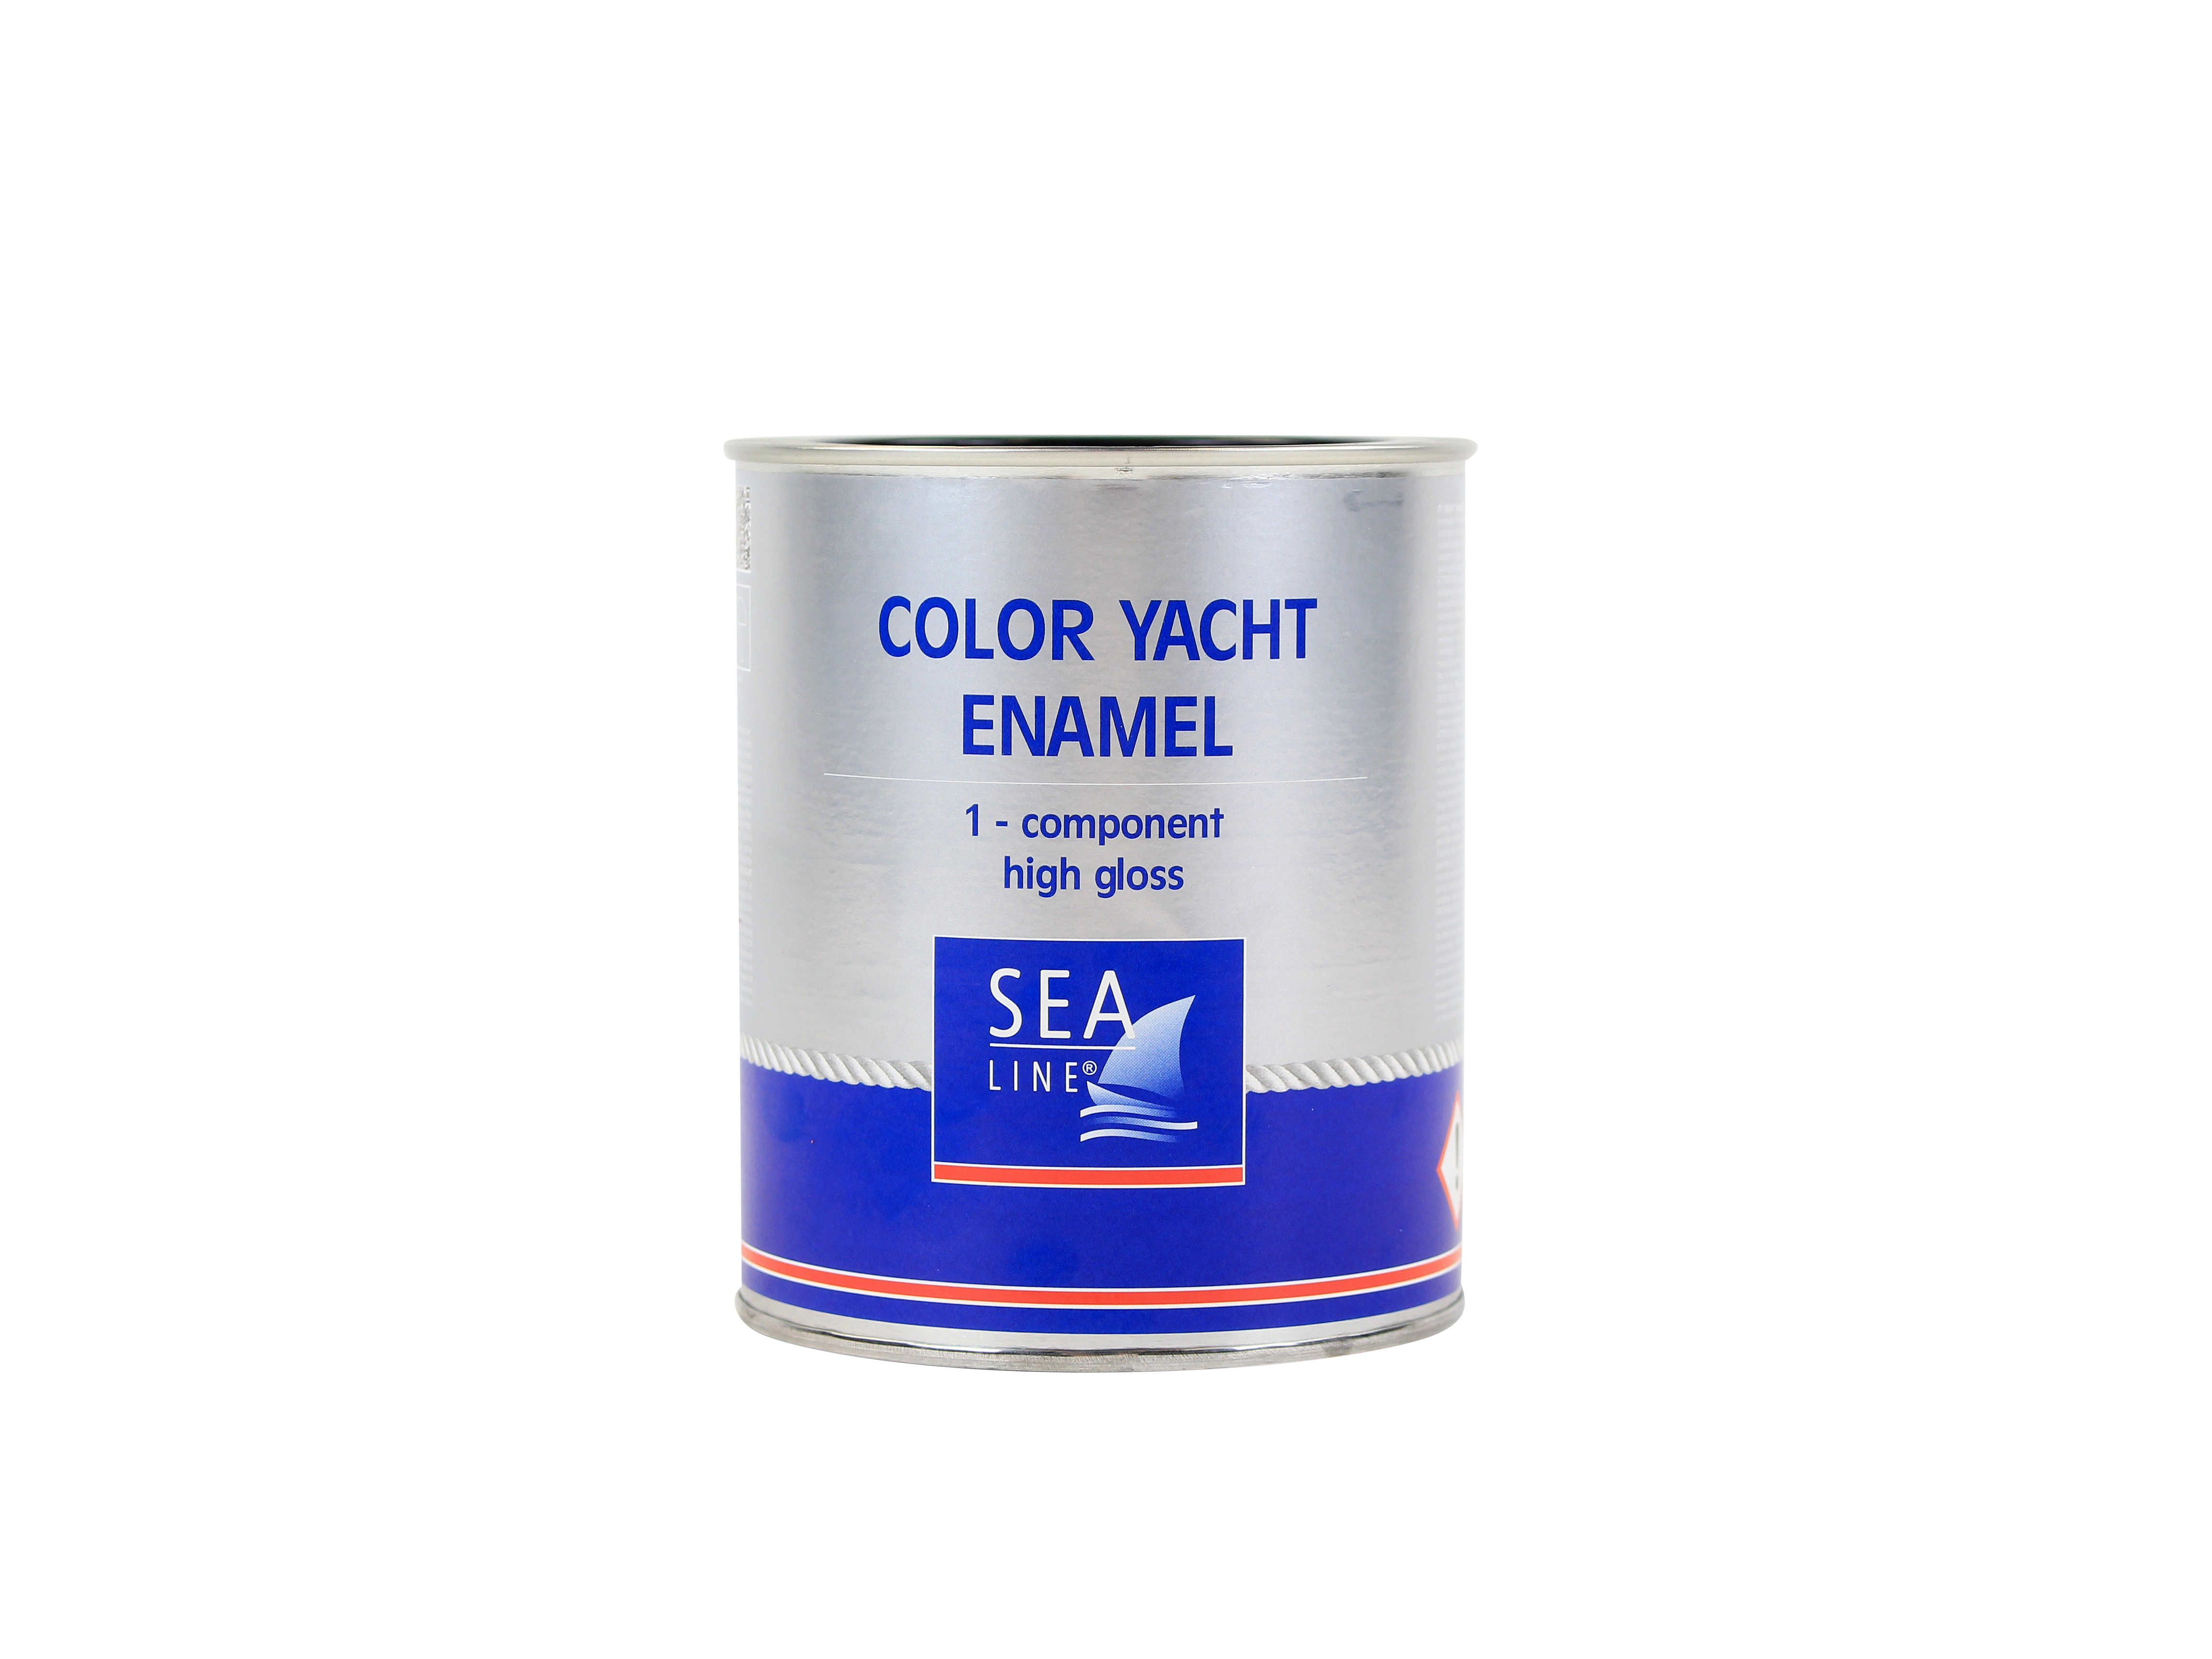 Durable enamel lacquer paint for wood, glass, plastic and metal - RAL 9001